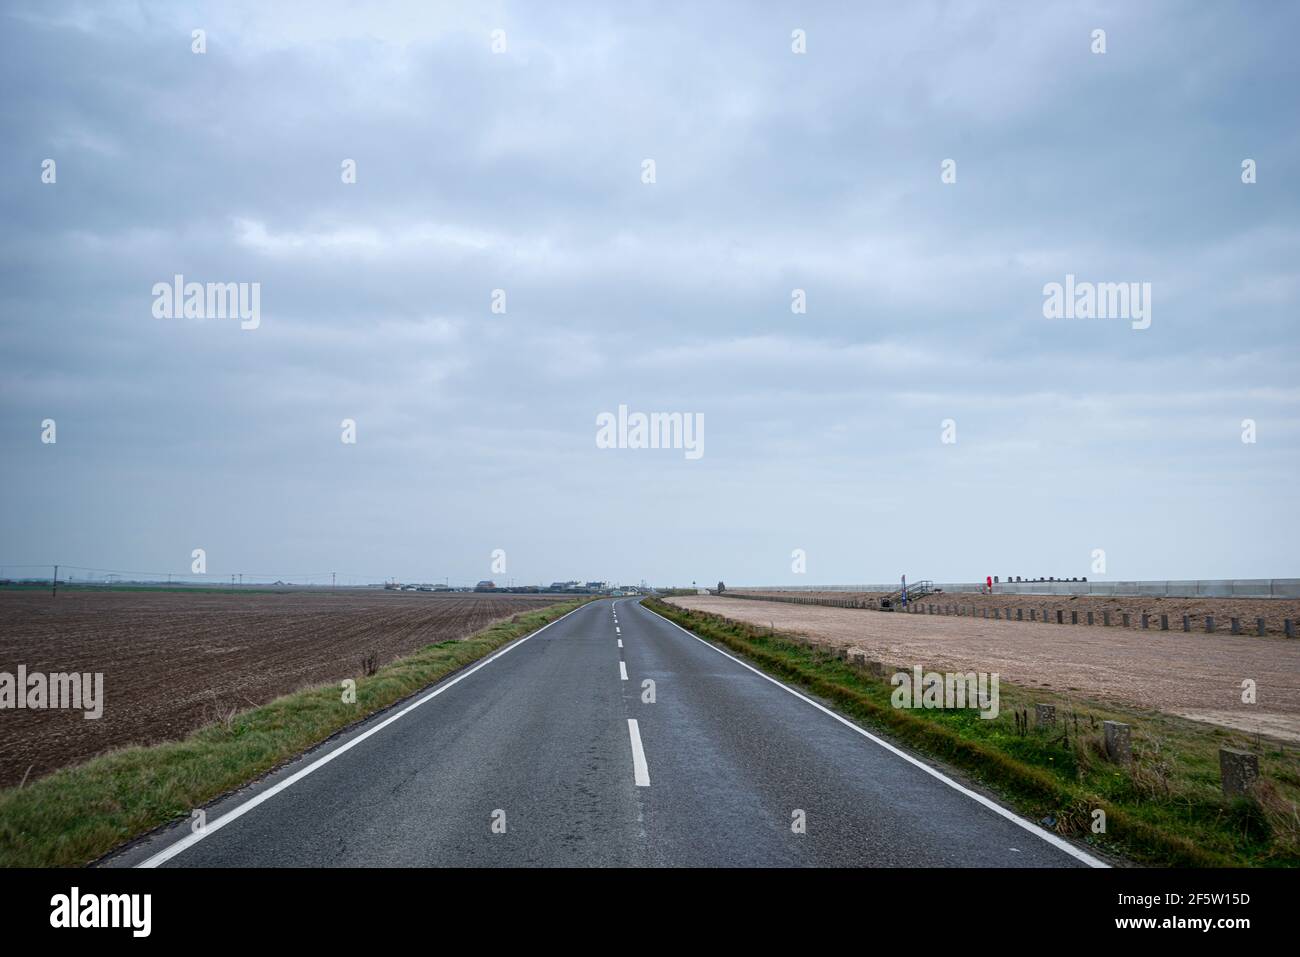 single point perspective of two lane black top road stretching to horizon through flat farmland with buildings faintly in the disctance. Stock Photo